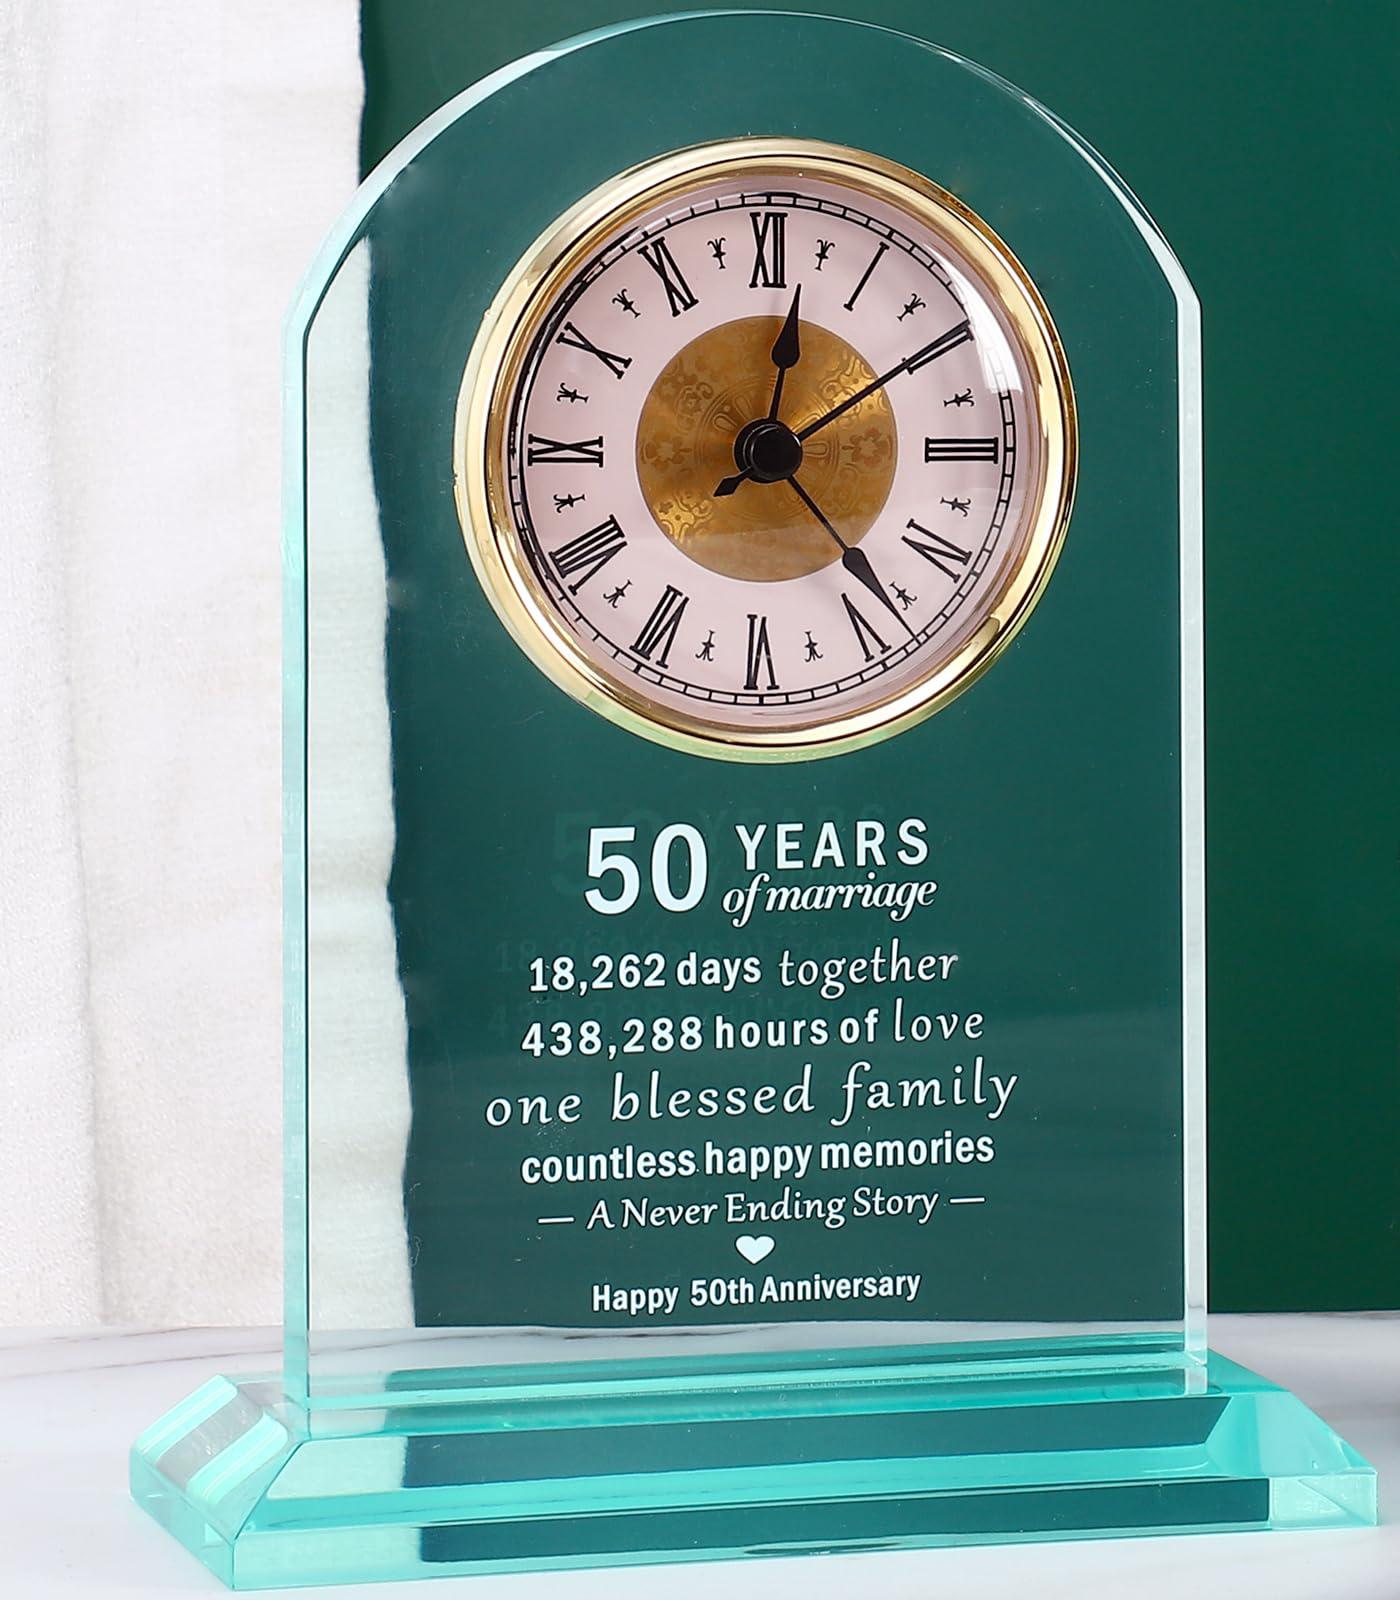 lesen 50th golden wedding anniversary quartz table clock gifts,50 years of marriage decoration gift for parents couple